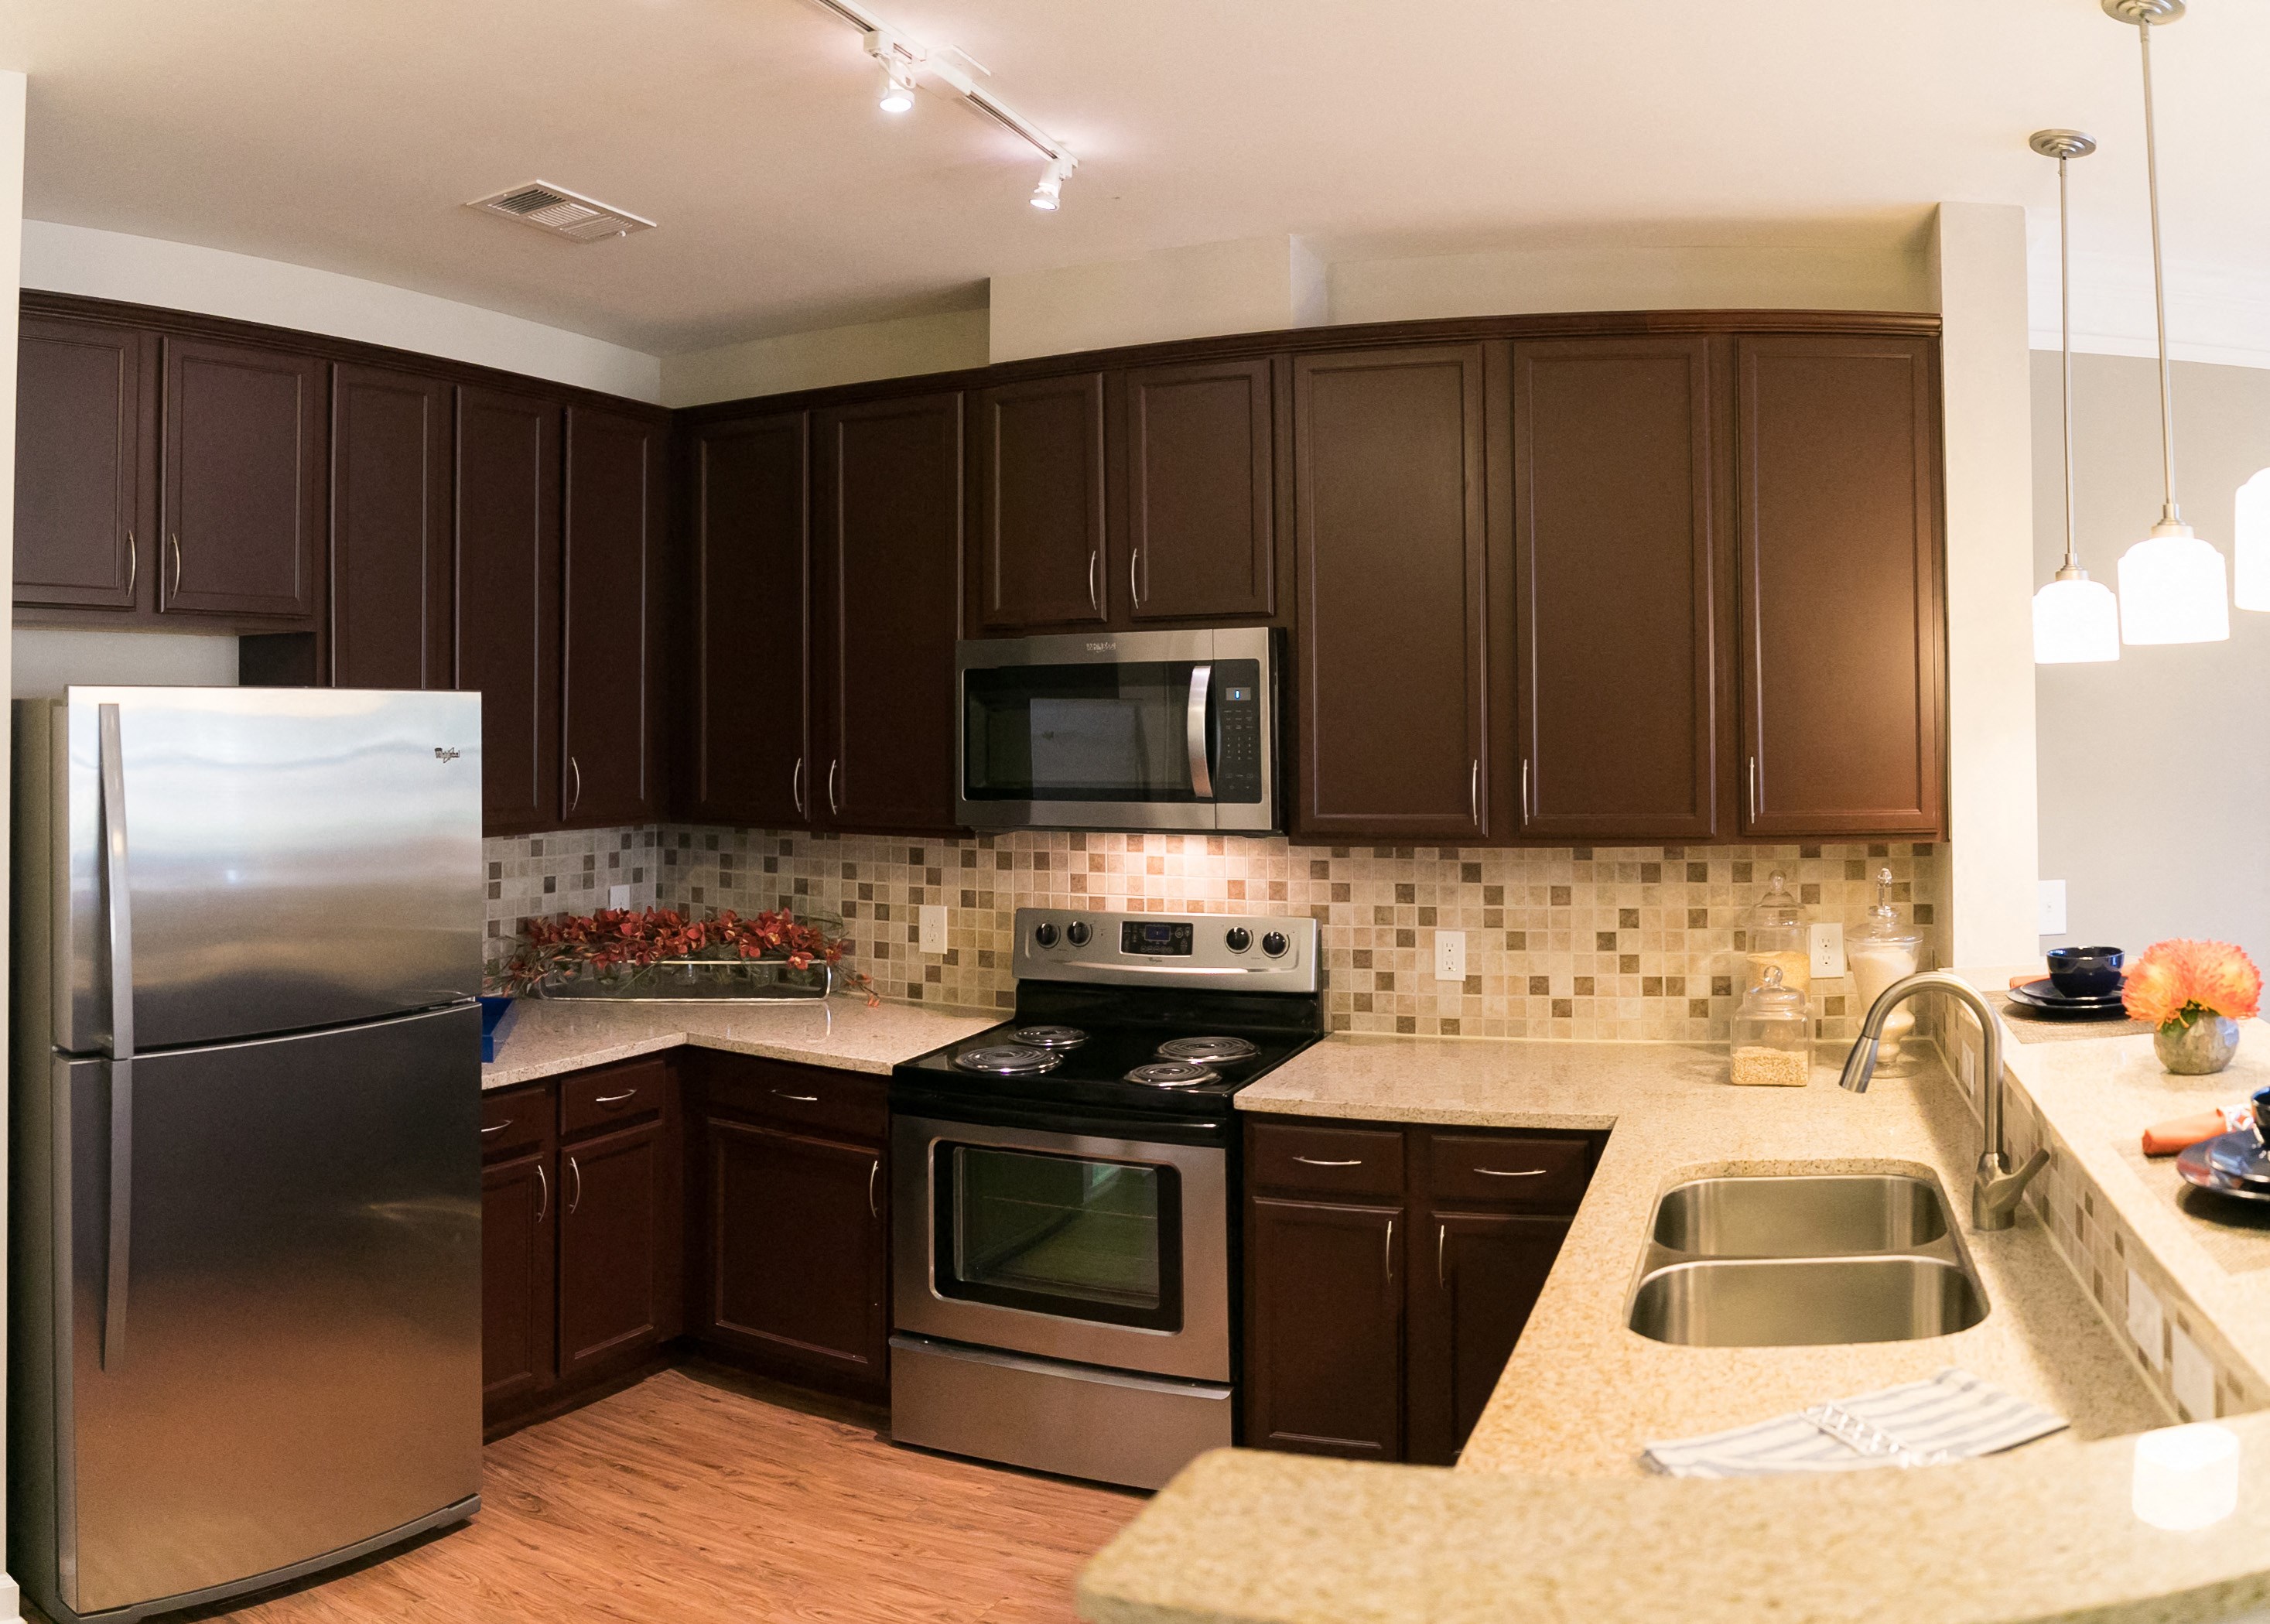 Kitchen area with brown cabinets, stainless steel appliances, and granite countertops.